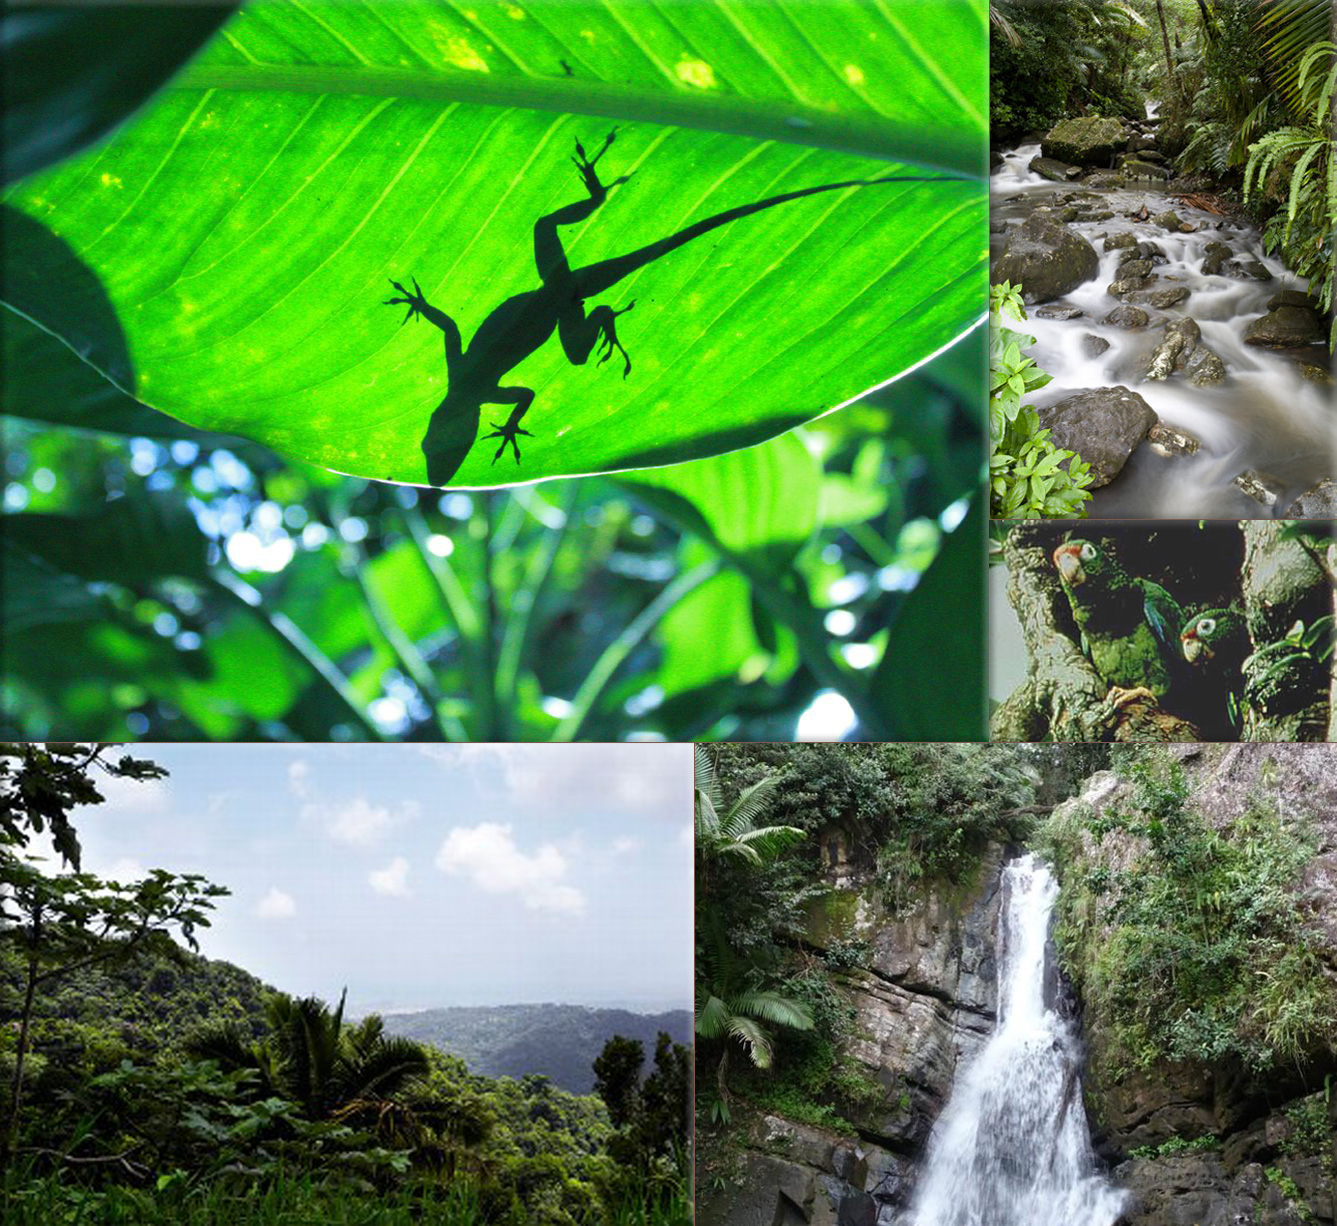 El Yunque National Forest, is a forest located in northeastern Puerto Rico (It is the only tropical rain forest in the United States National Forest System)